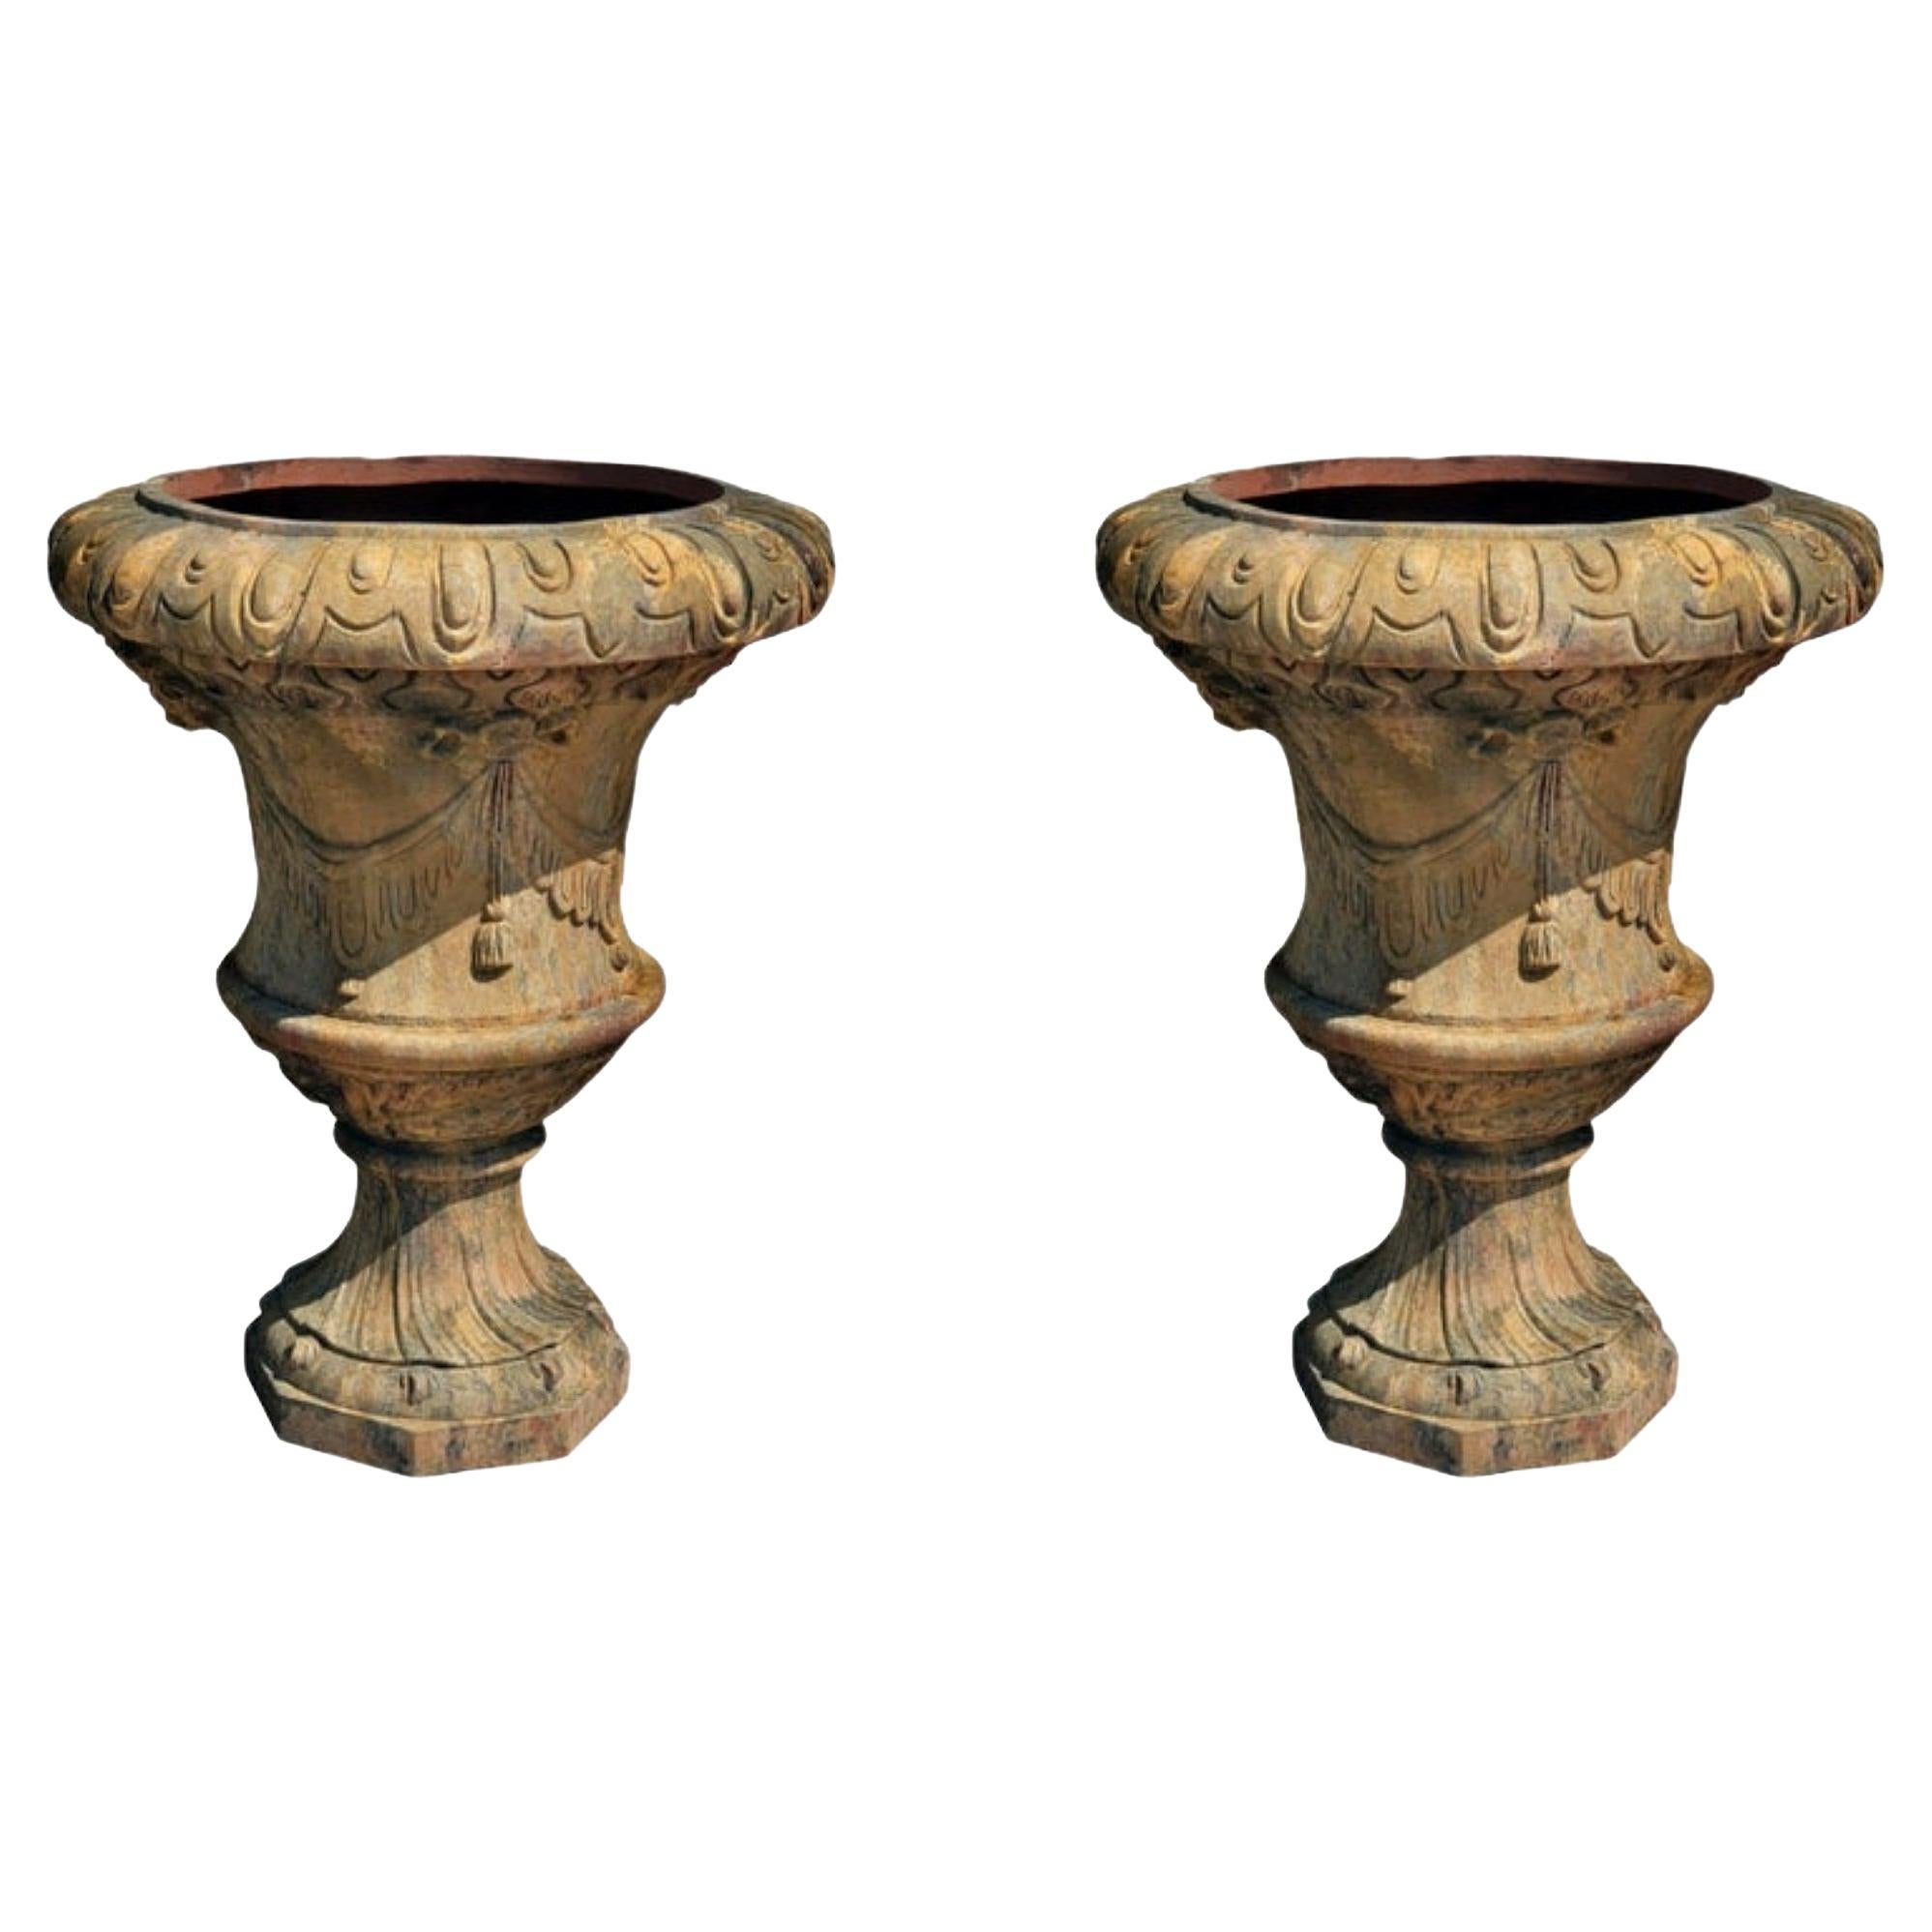 Pair of Large Florentine Ornamental Vases in Terracotta Early 20th Century